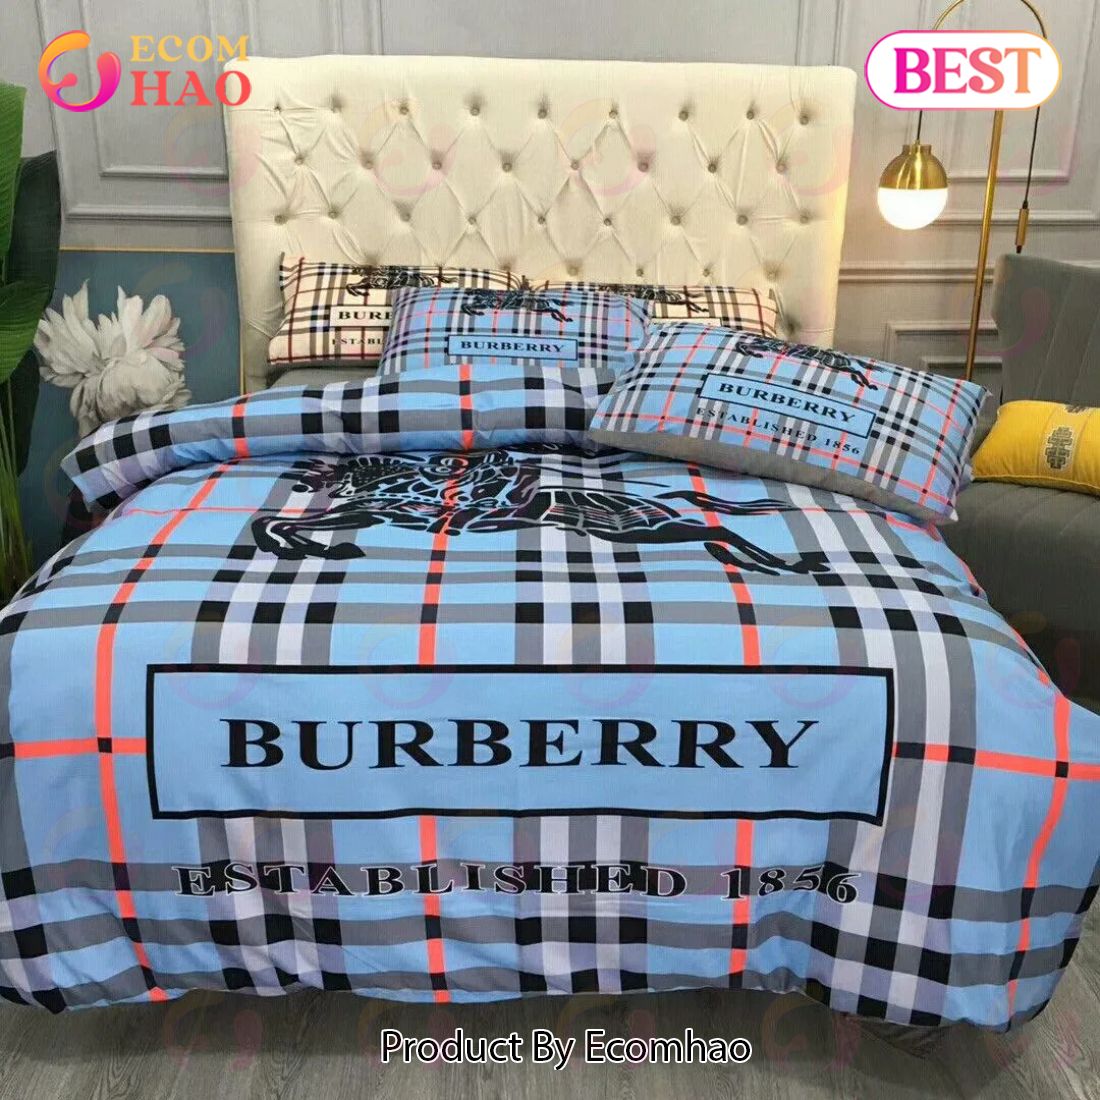 Burberry Blue Fashion New Bedding Sets Quilt Sets Duvet Cover Luxury Brand Bedding Decor Bedroom Sets Best Luxury Bed Sets Gift Thankgivings And Christmas